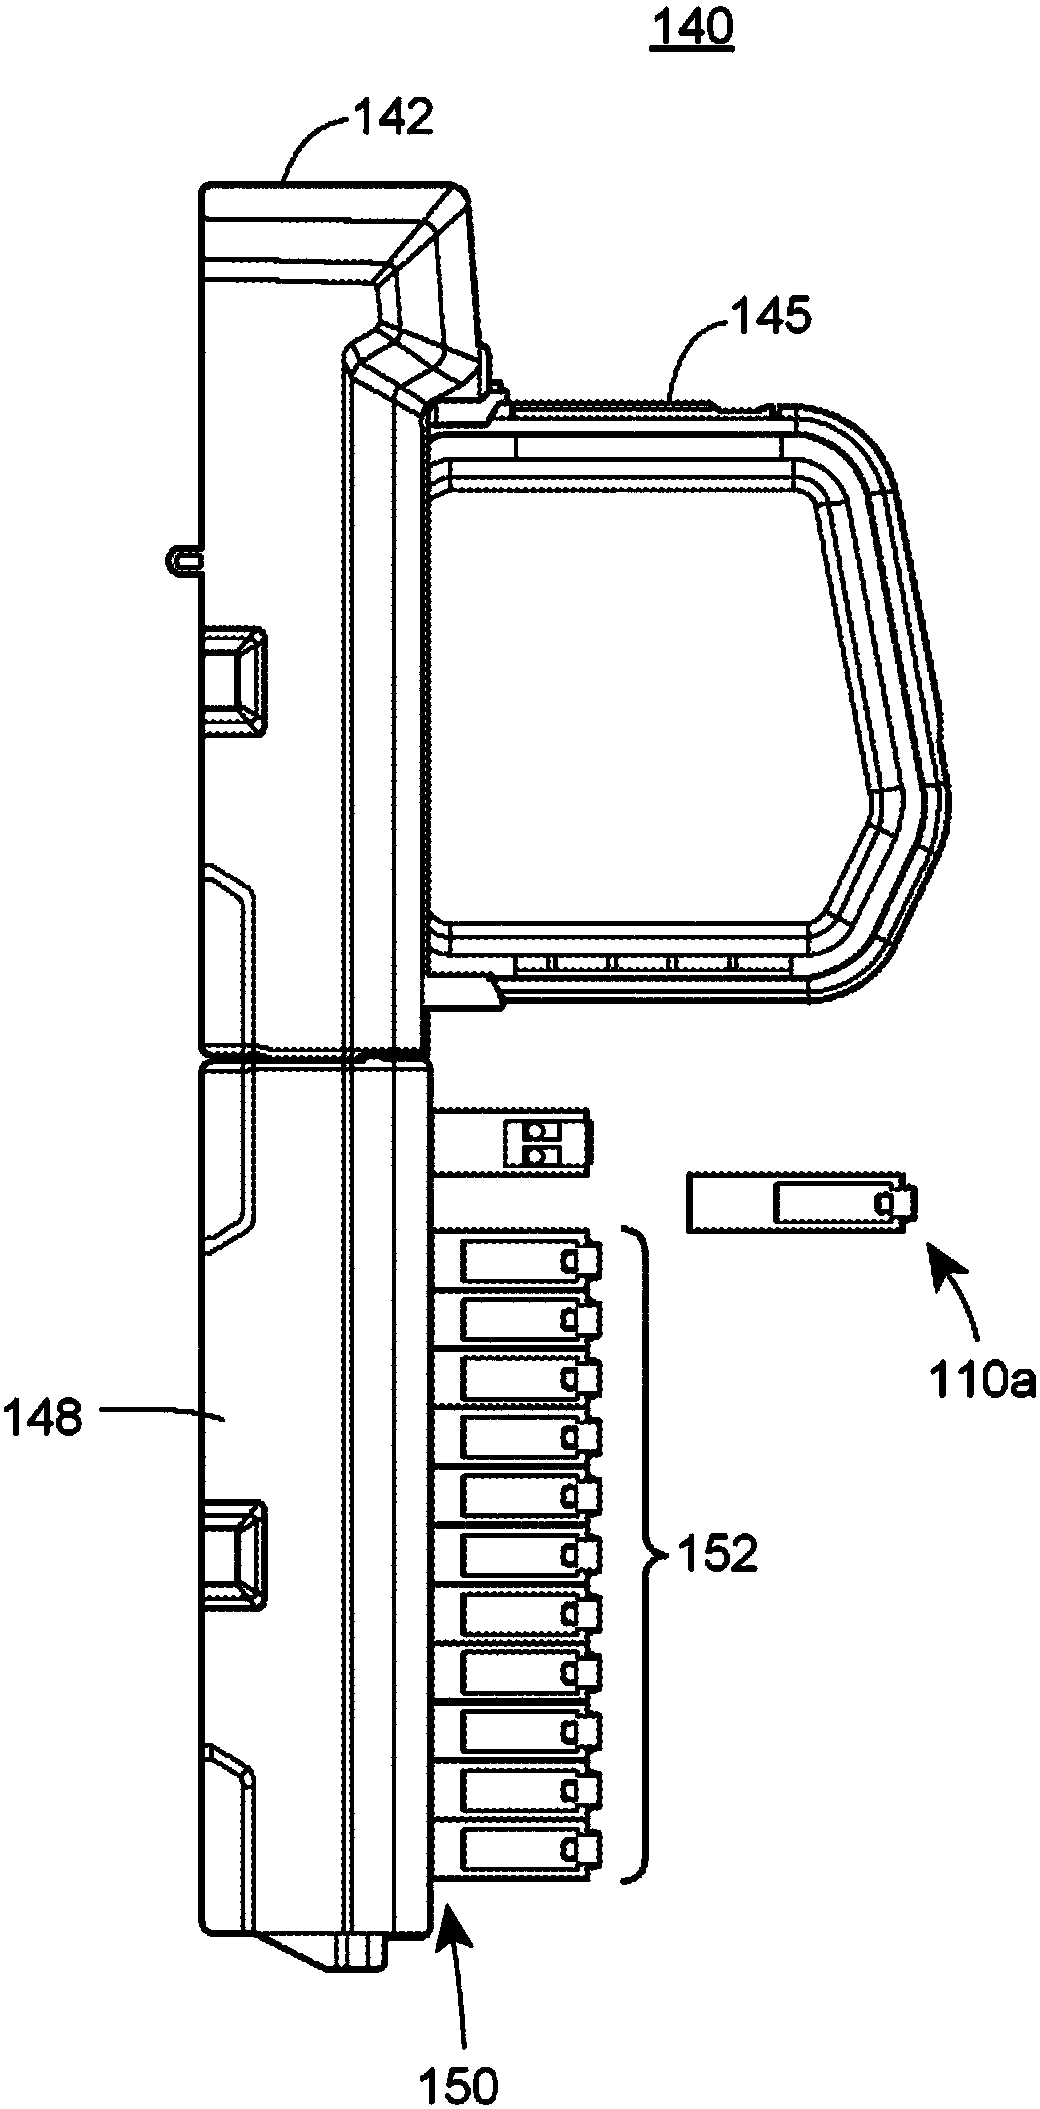 Configuration in process plant using i/o-abstracted field device configurations